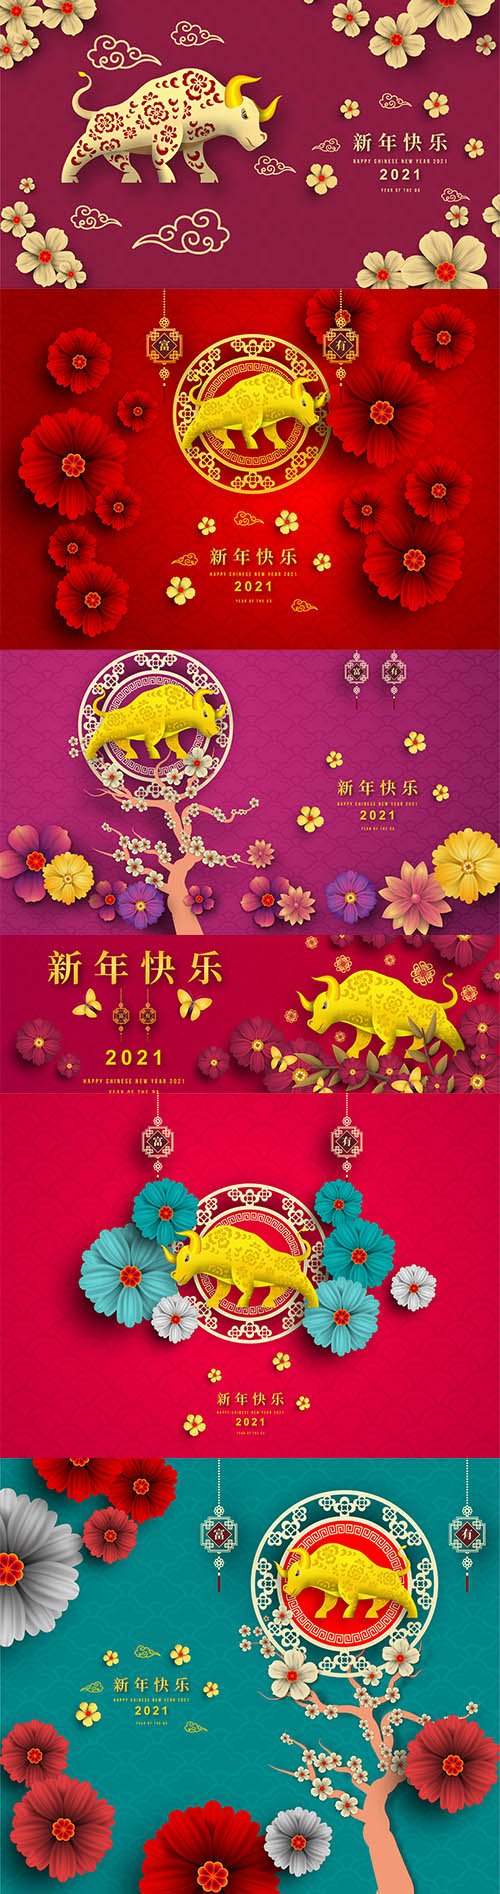 Happy chinese new year 2021 year of the ox paper cut style